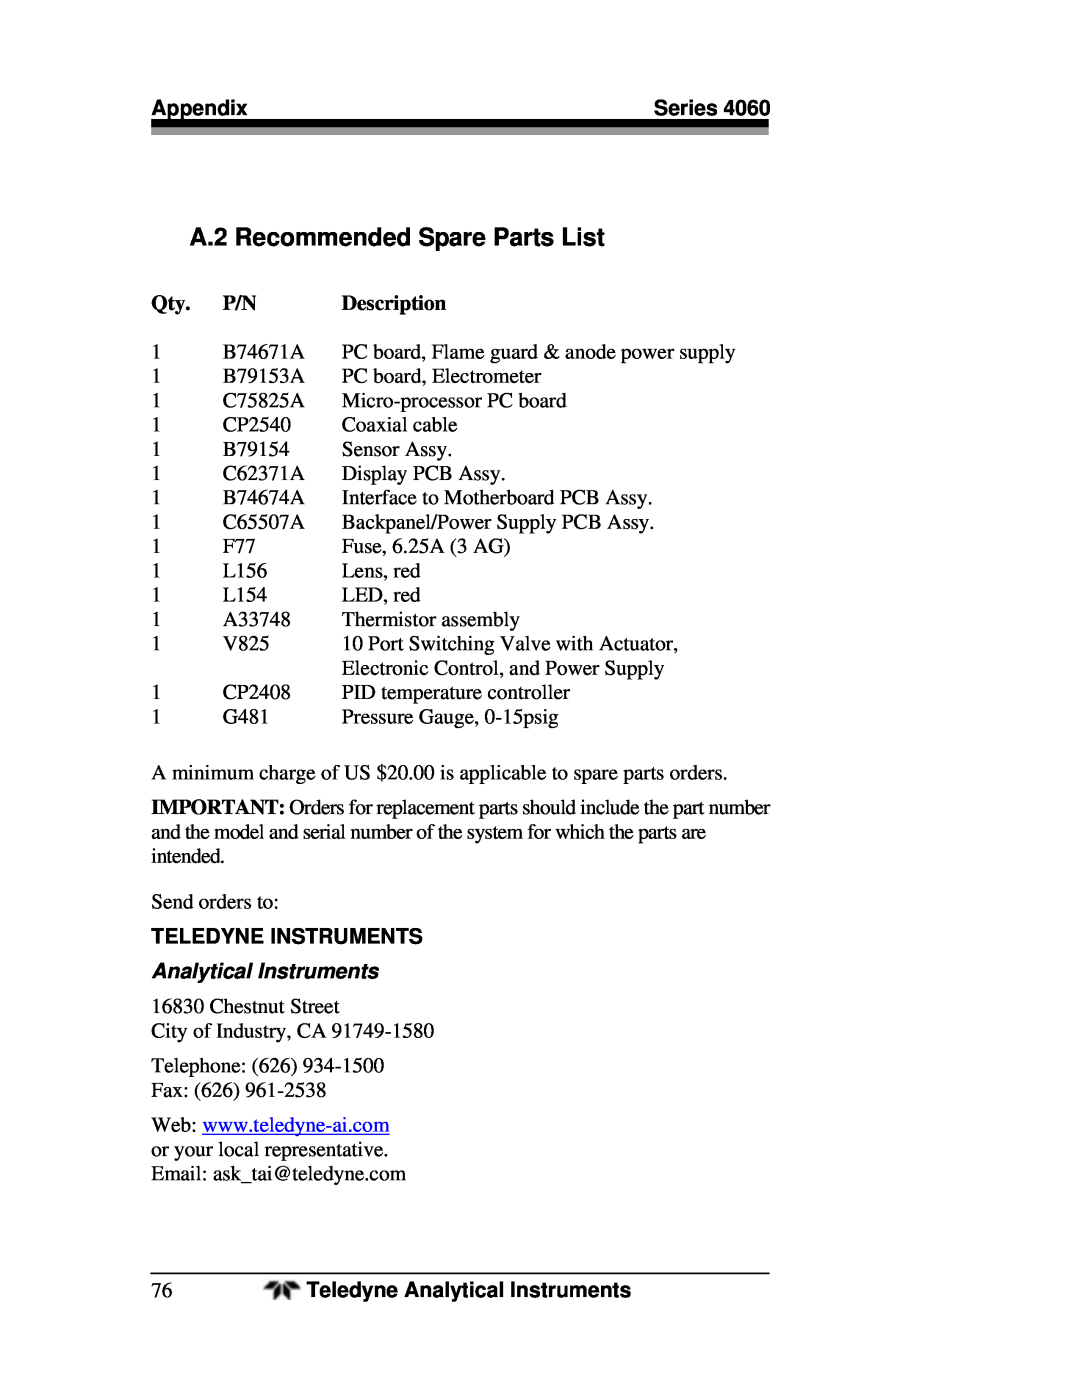 Teledyne 4060 manual A.2 Recommended Spare Parts List, Analytical Instruments 